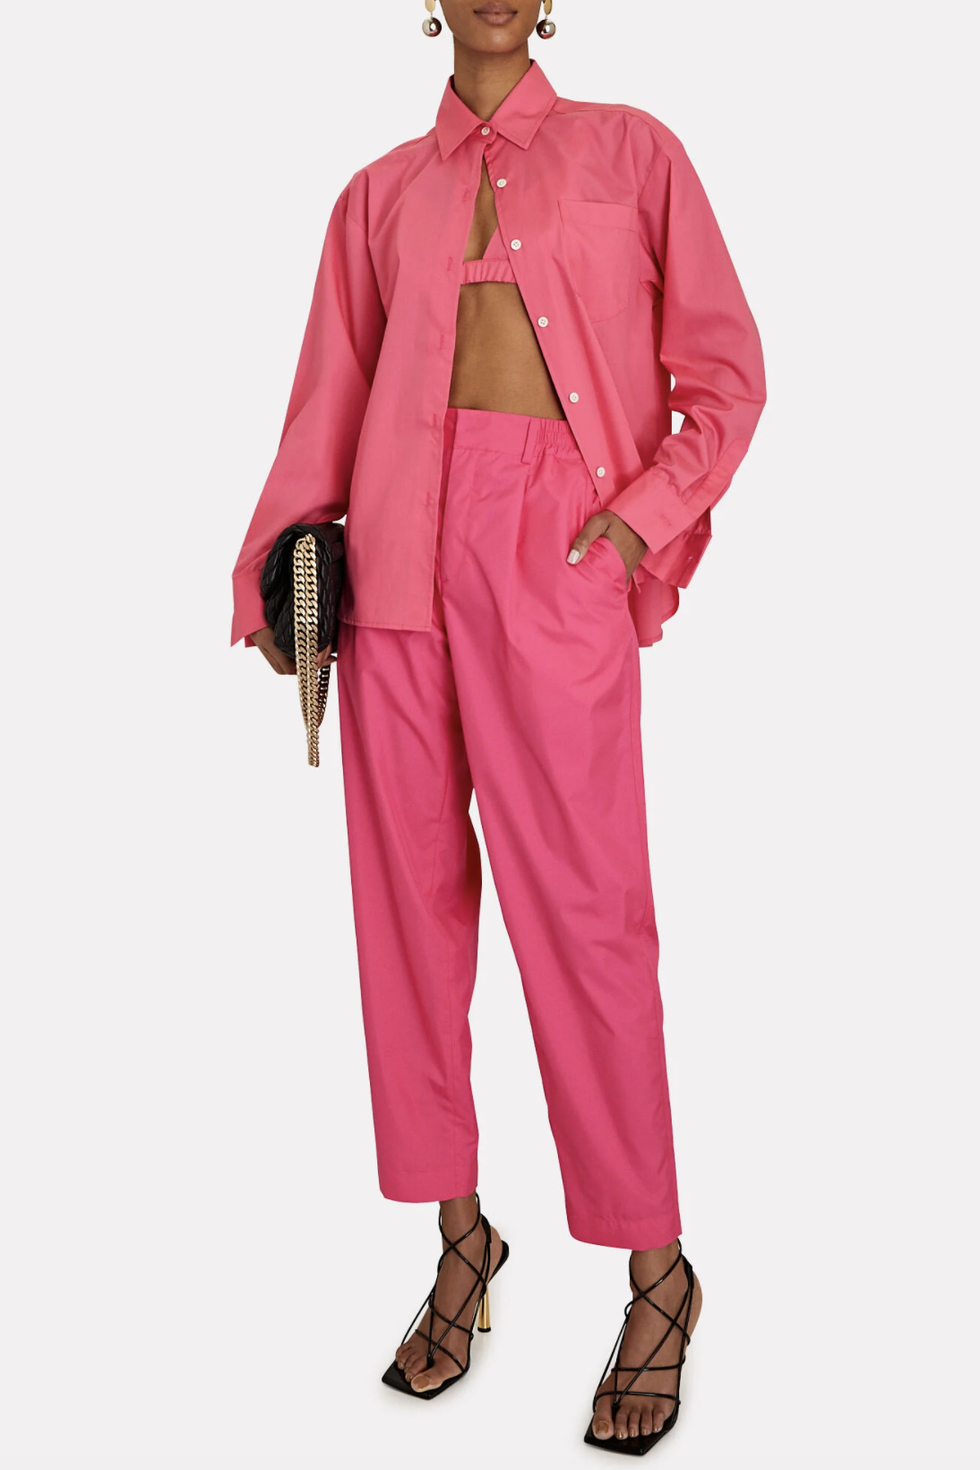 The Hot Pink Clothing Trend Is Taking Over for 2022